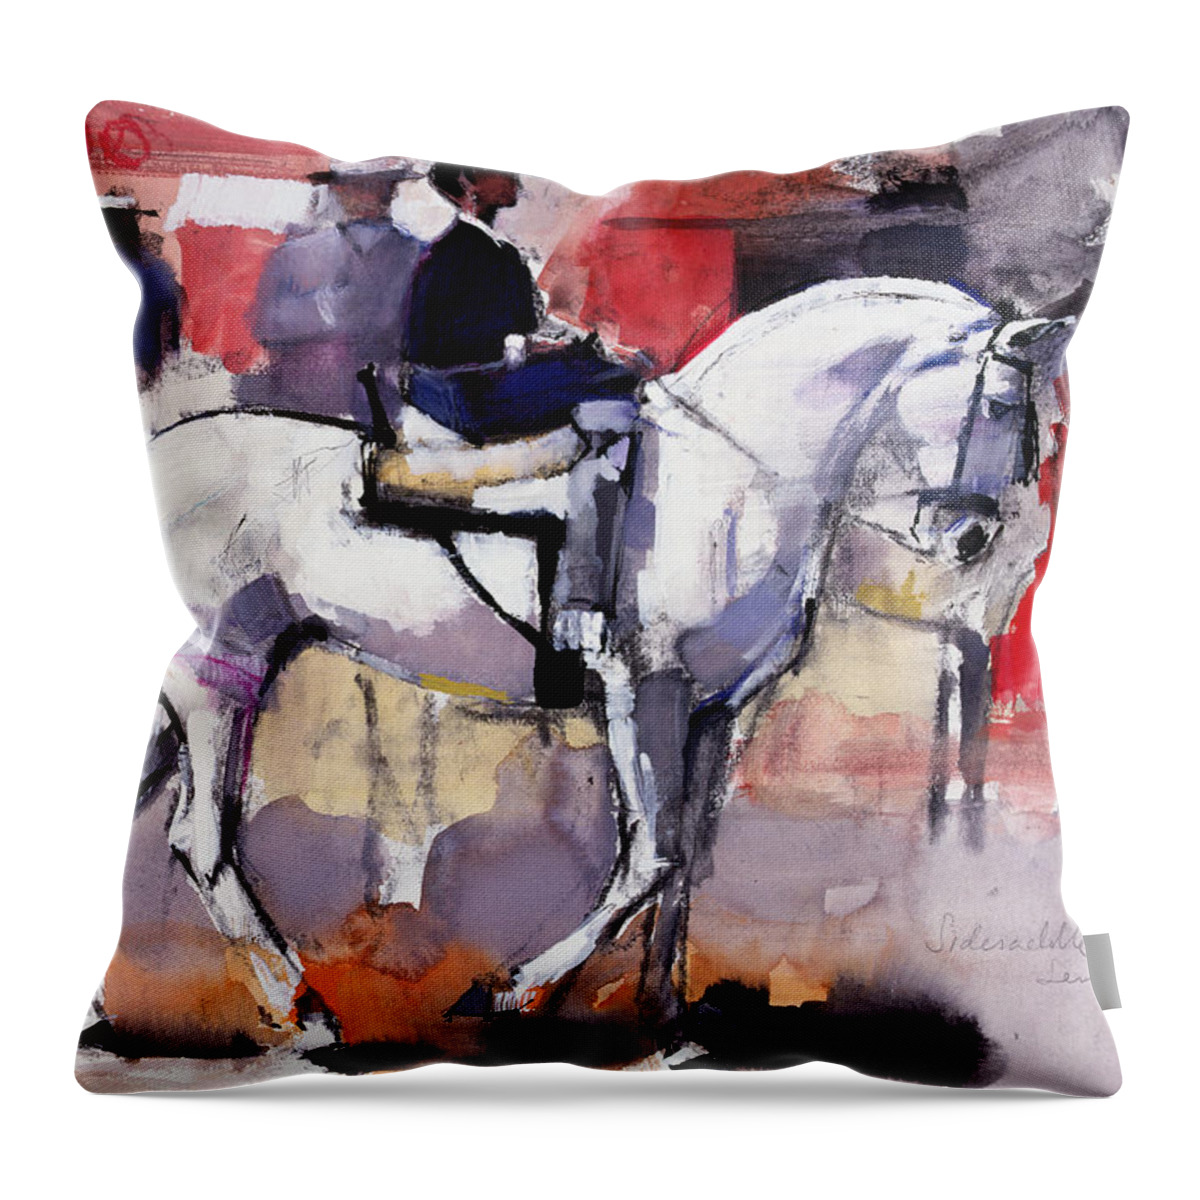 Side Throw Pillow featuring the photograph Side-saddle At The Feria De Sevilla, 1998 Mixed Media On Paper by Mark Adlington